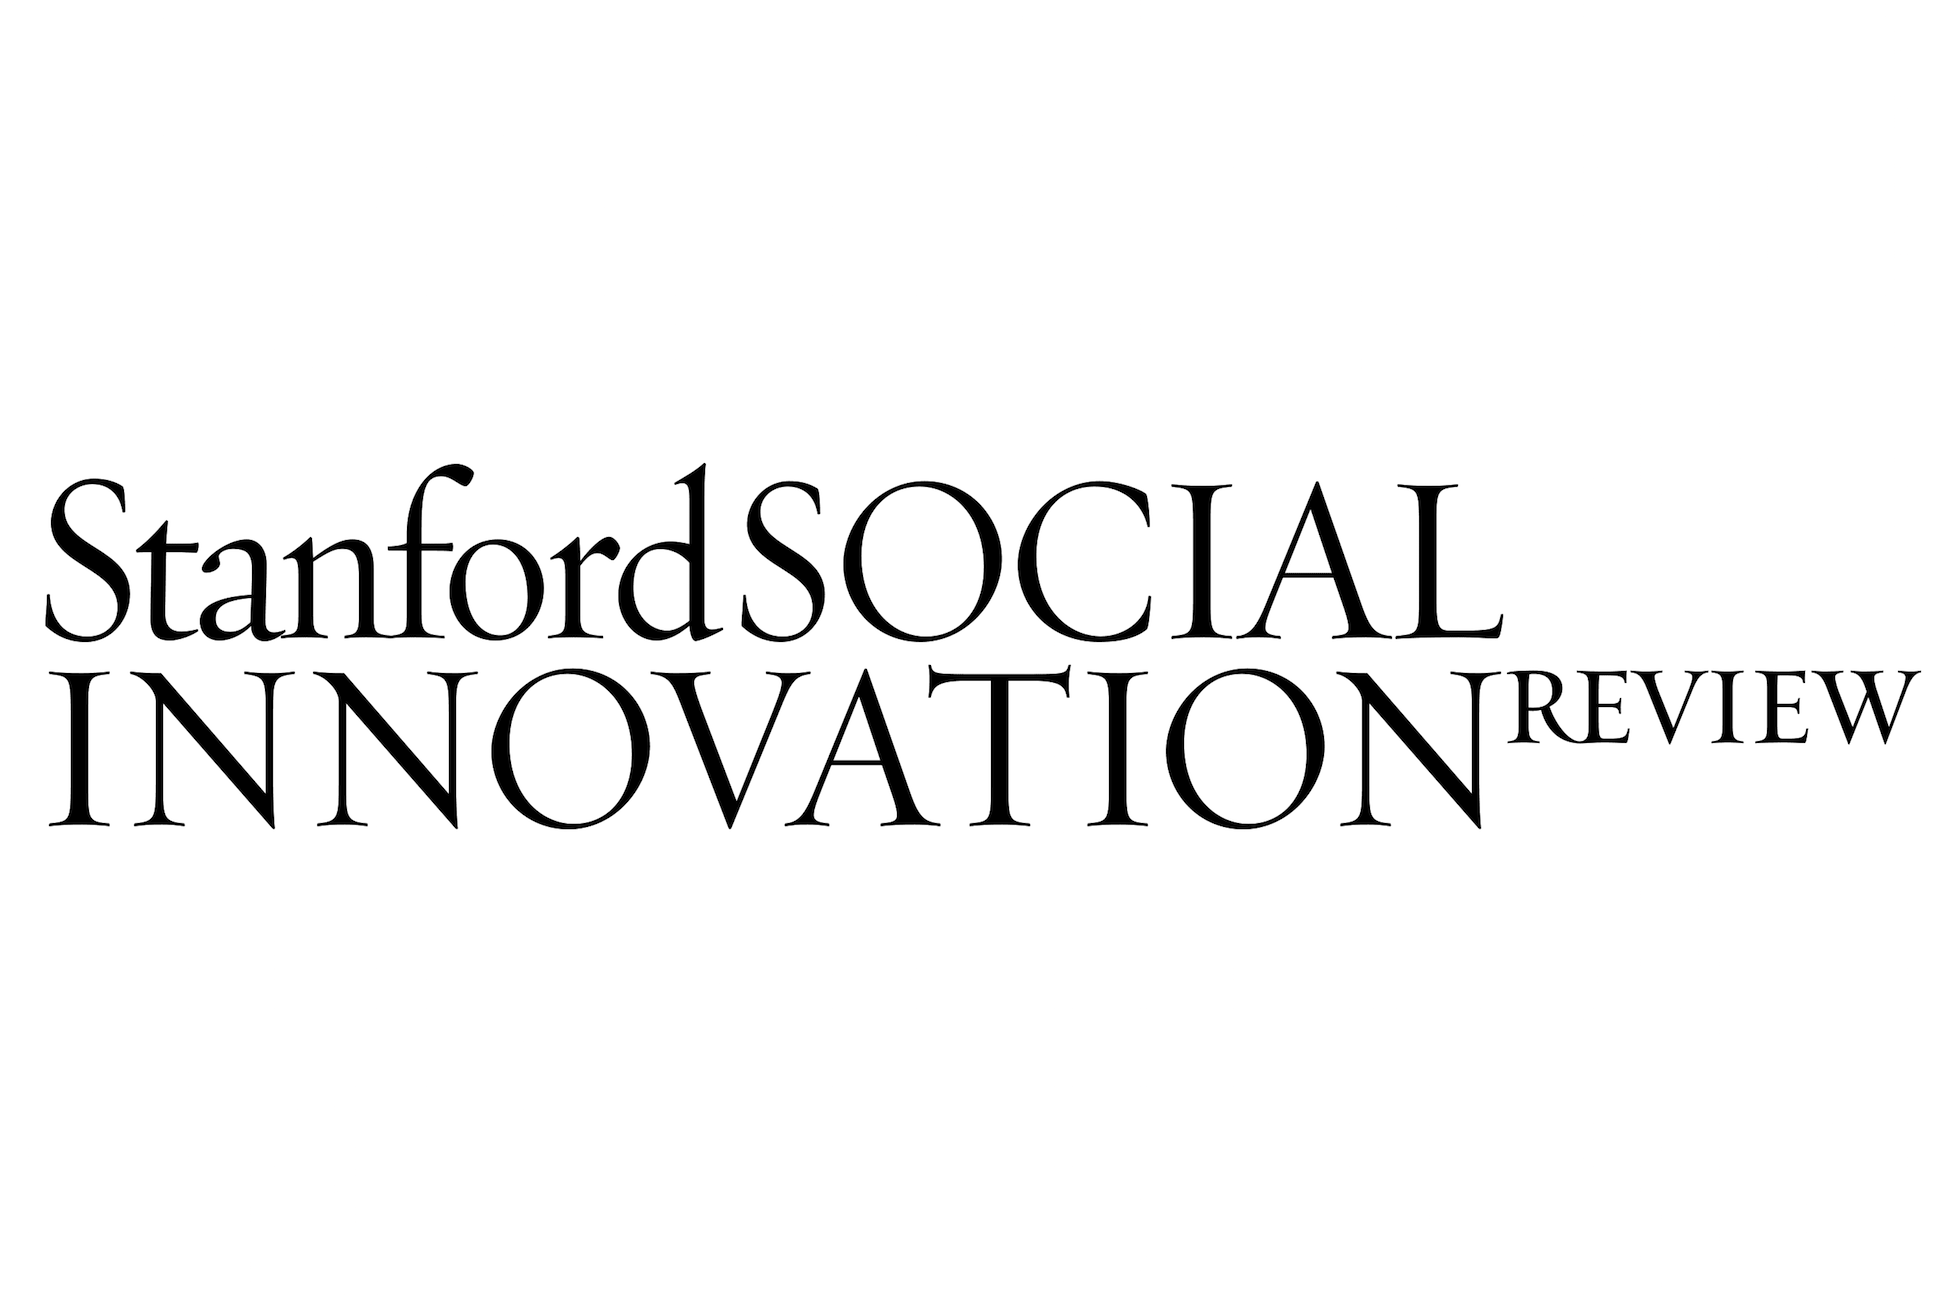 YFP-authored article in the Stanford Social Innovation Review